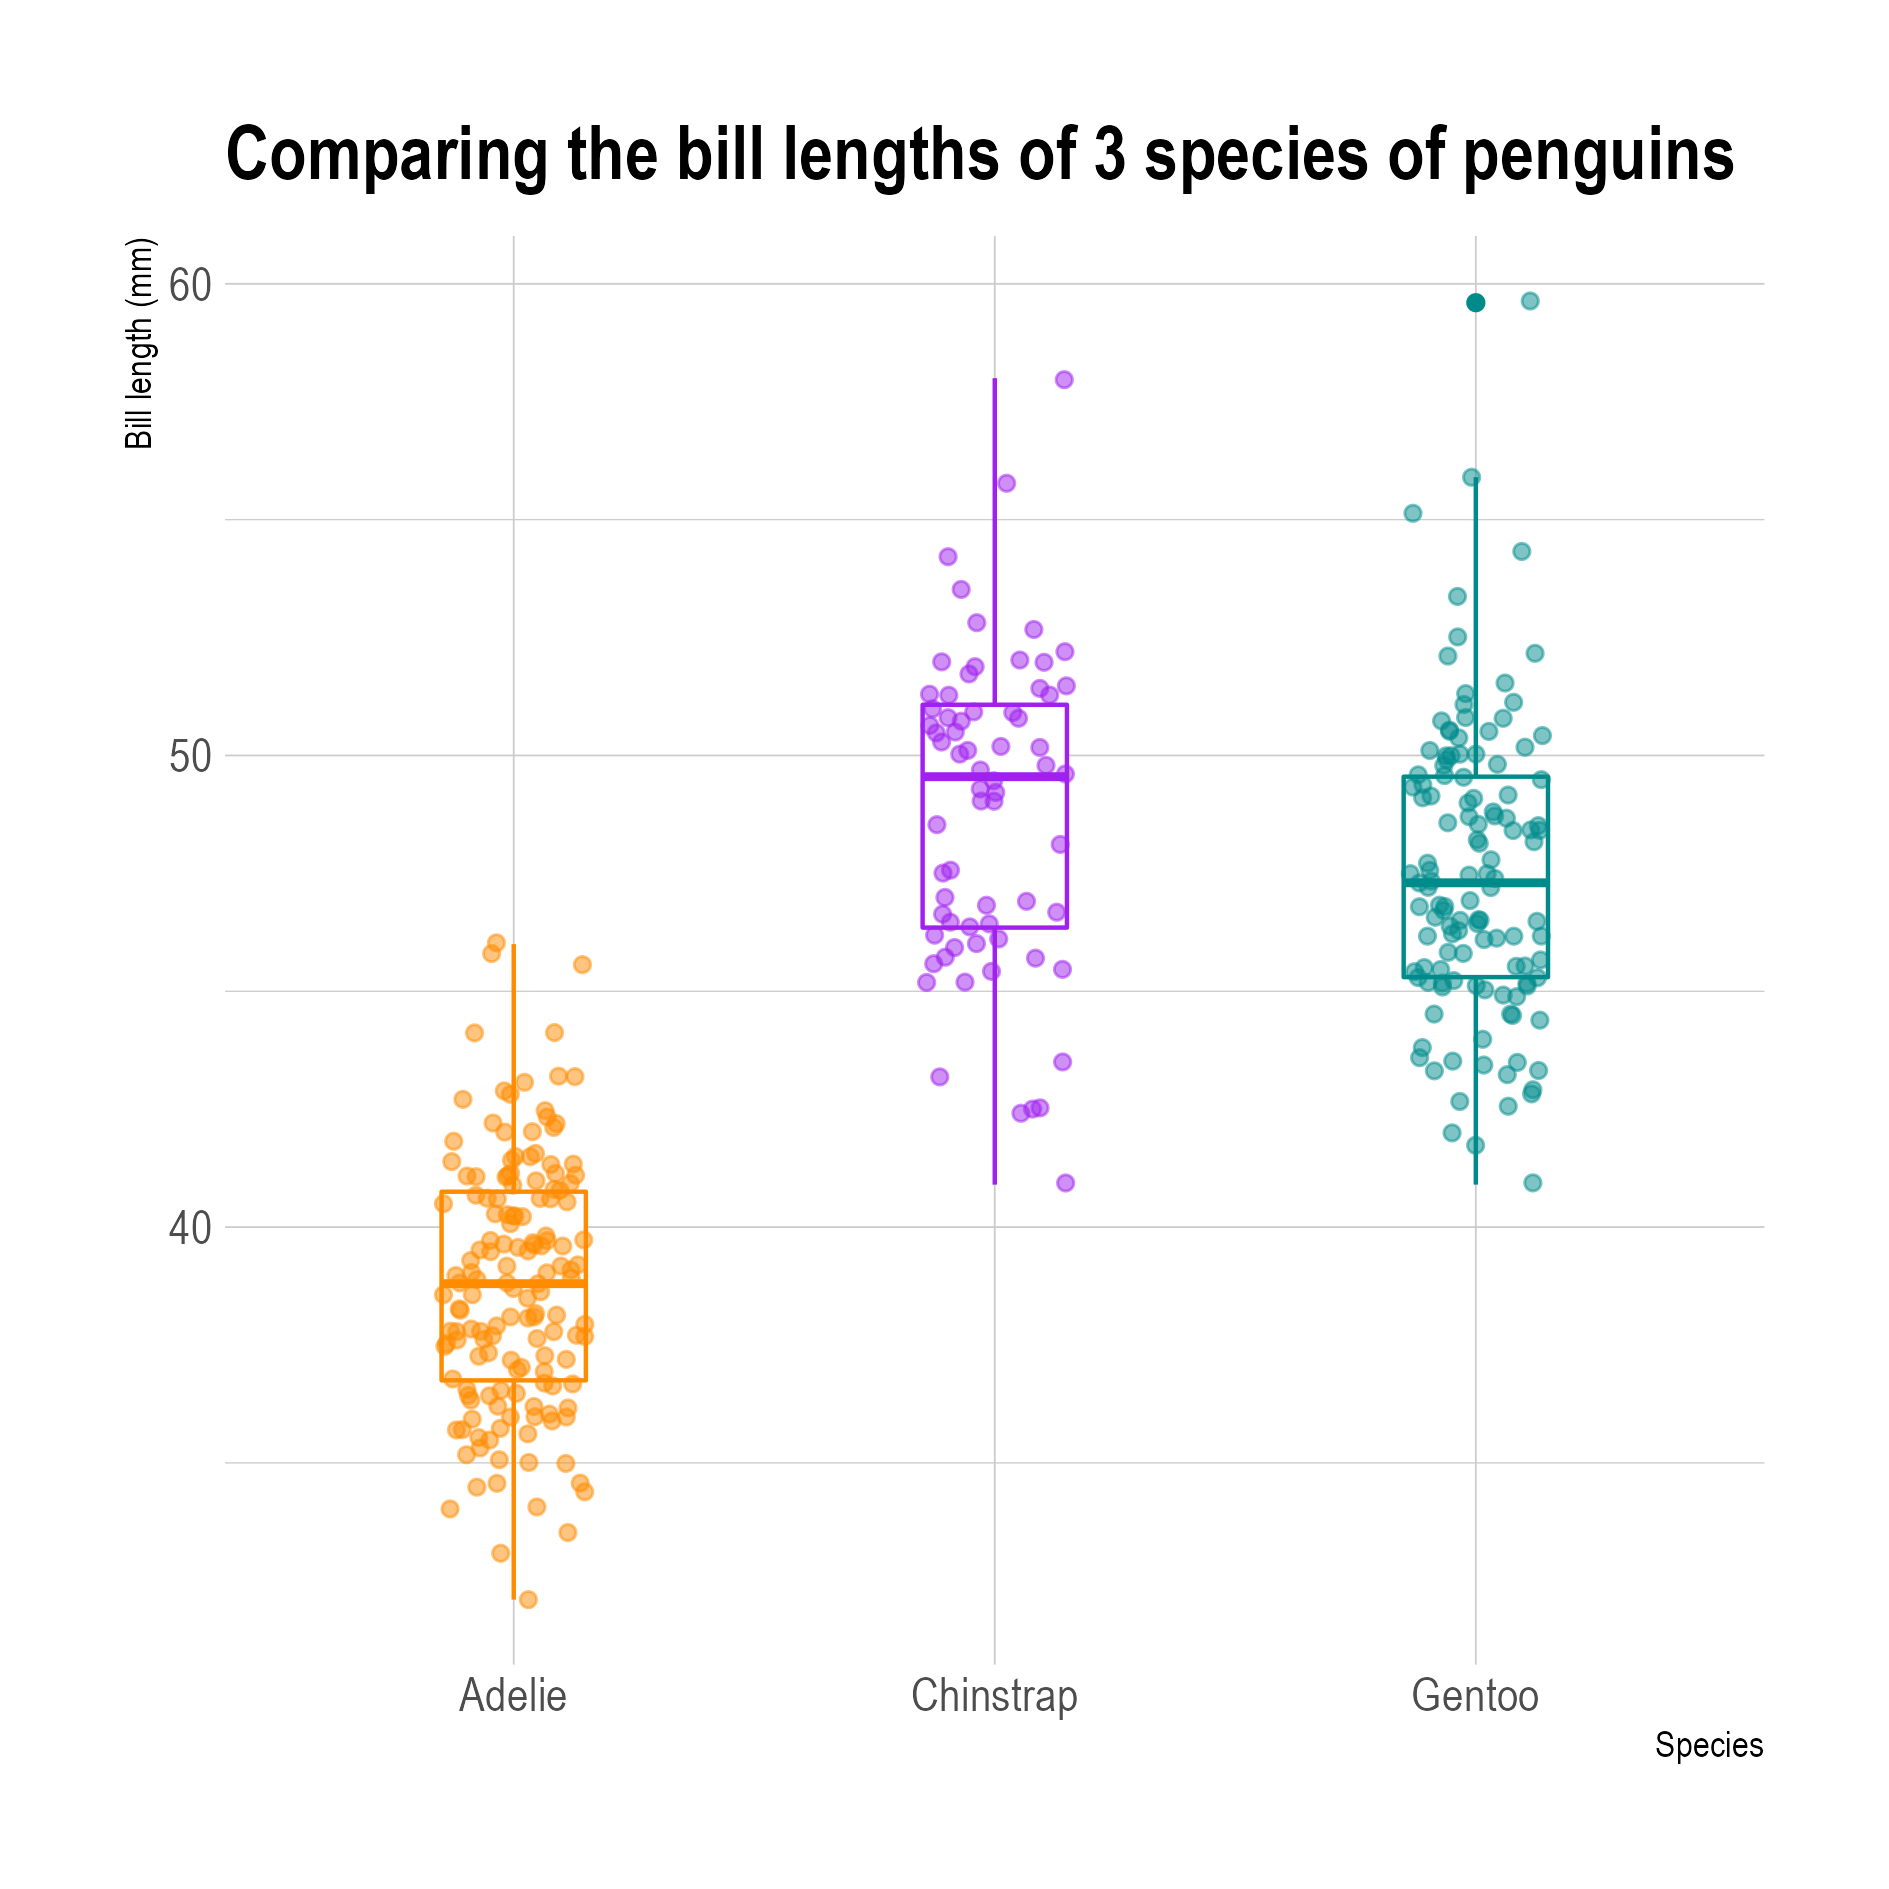 The same box plots as above, but with the actual data points plotted on top of them